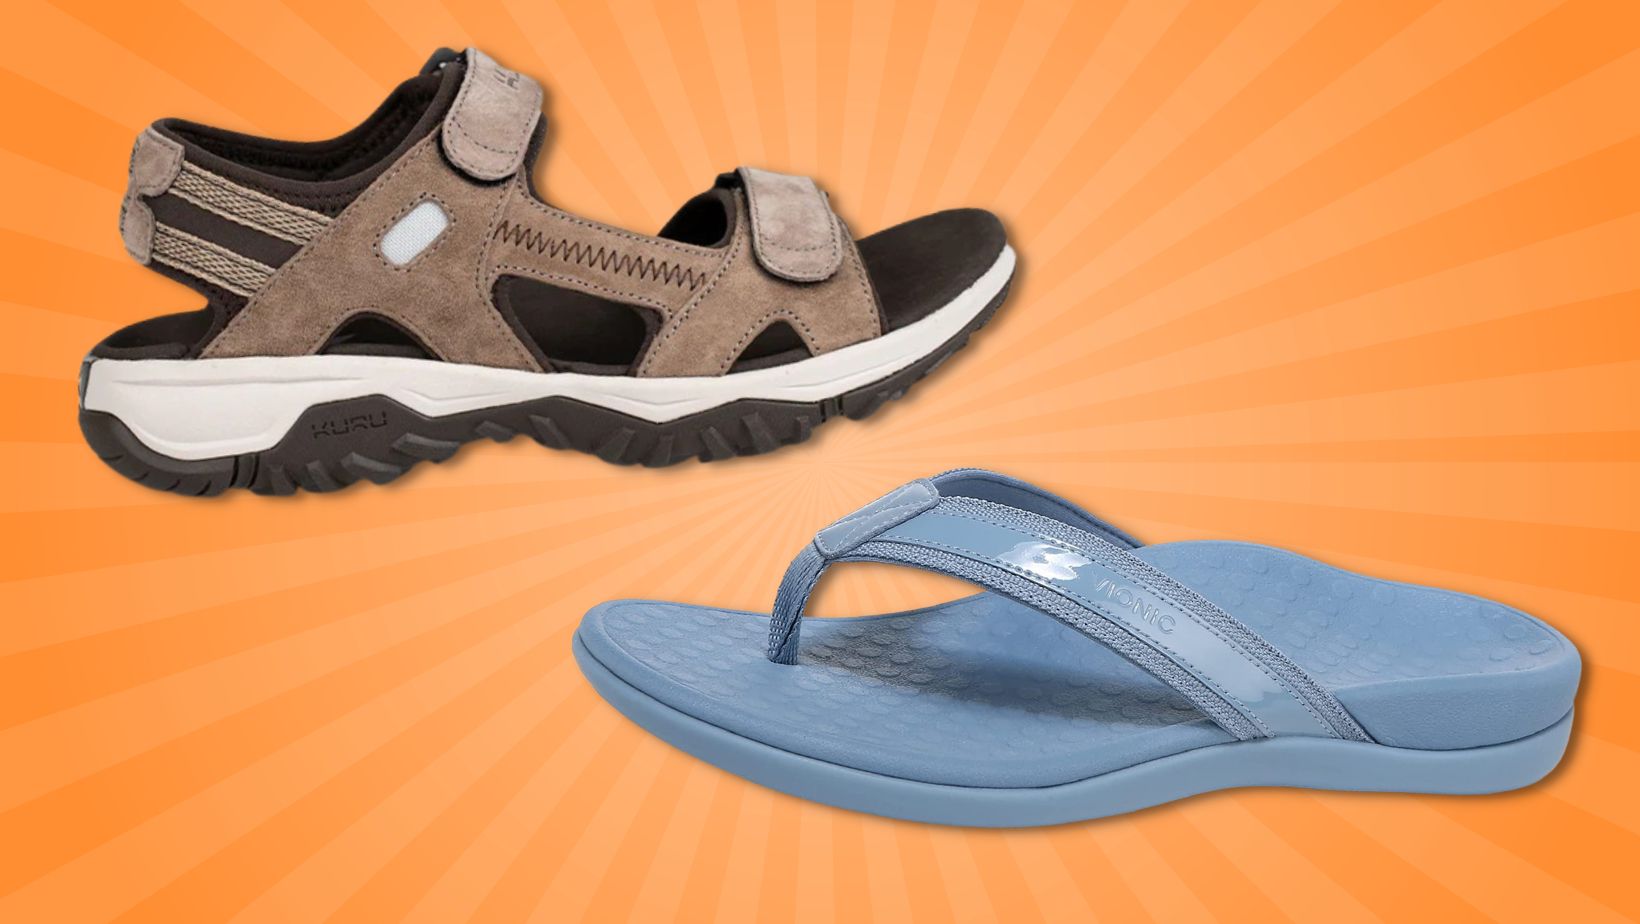 Guys, before you switch to sandals, check out your feet | The Seattle Times